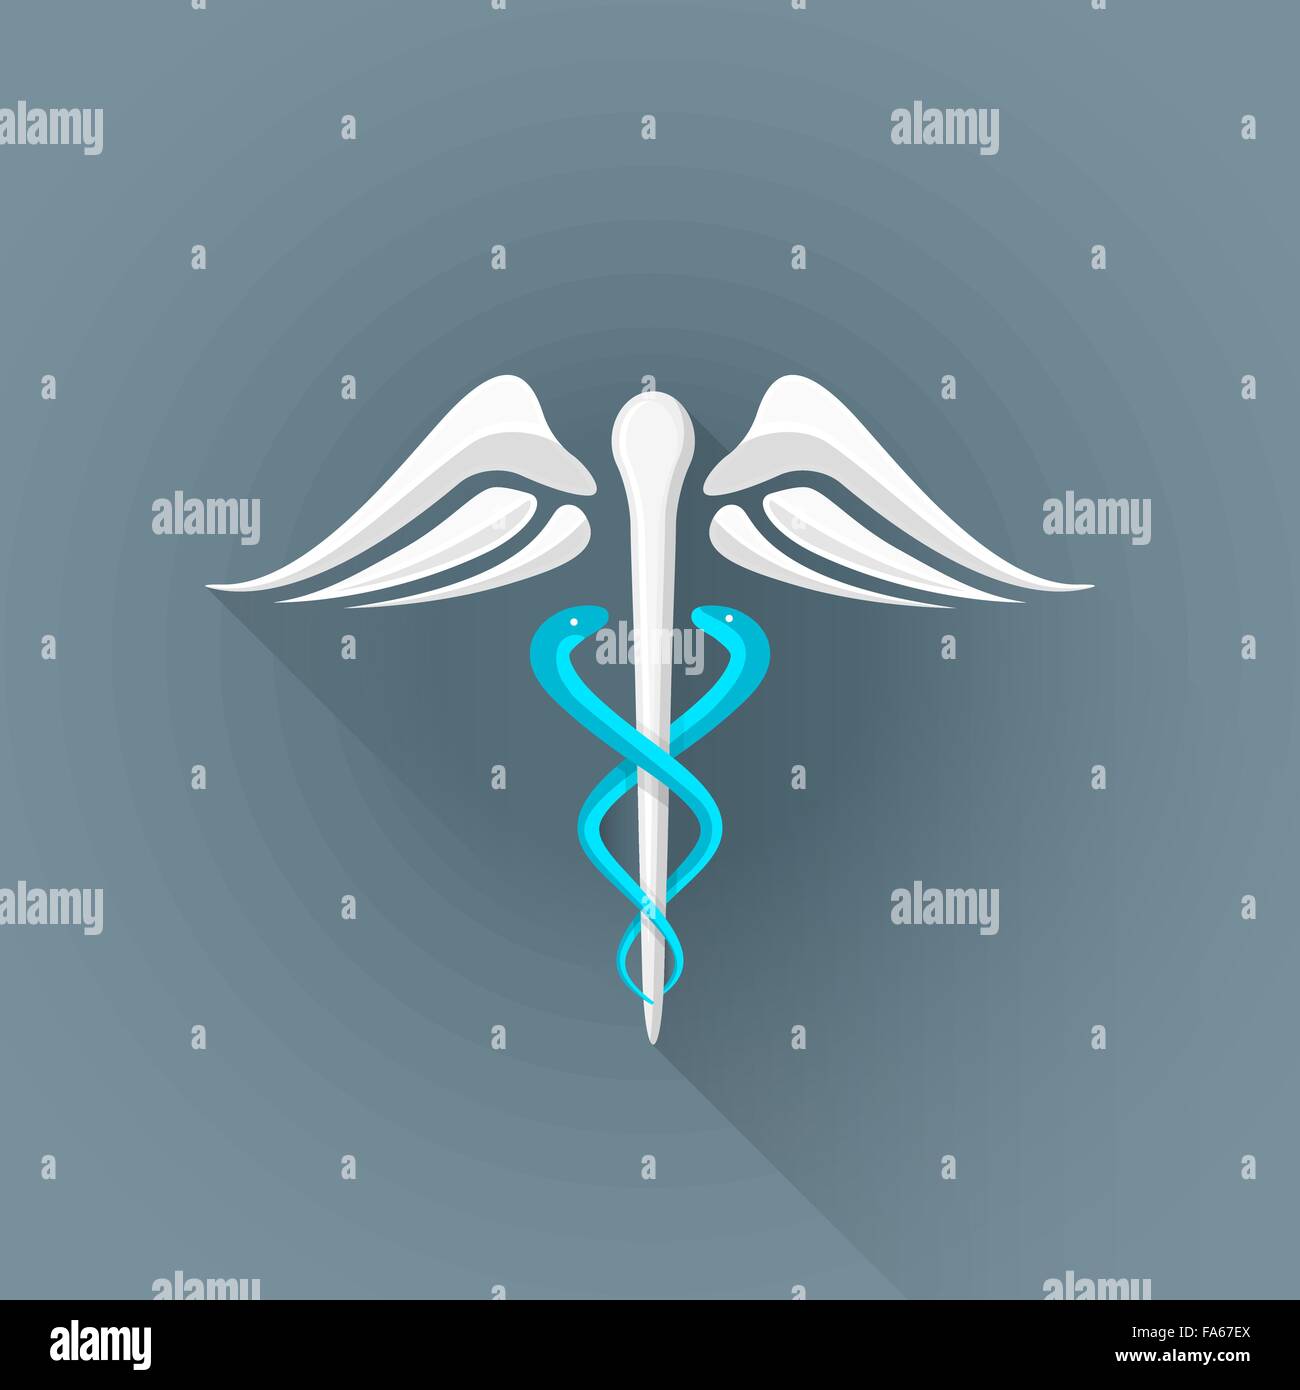 vector colored flat design caduceus white wing blue snake Rod of Asclepius symbol illustration isolated dark background long sha Stock Vector